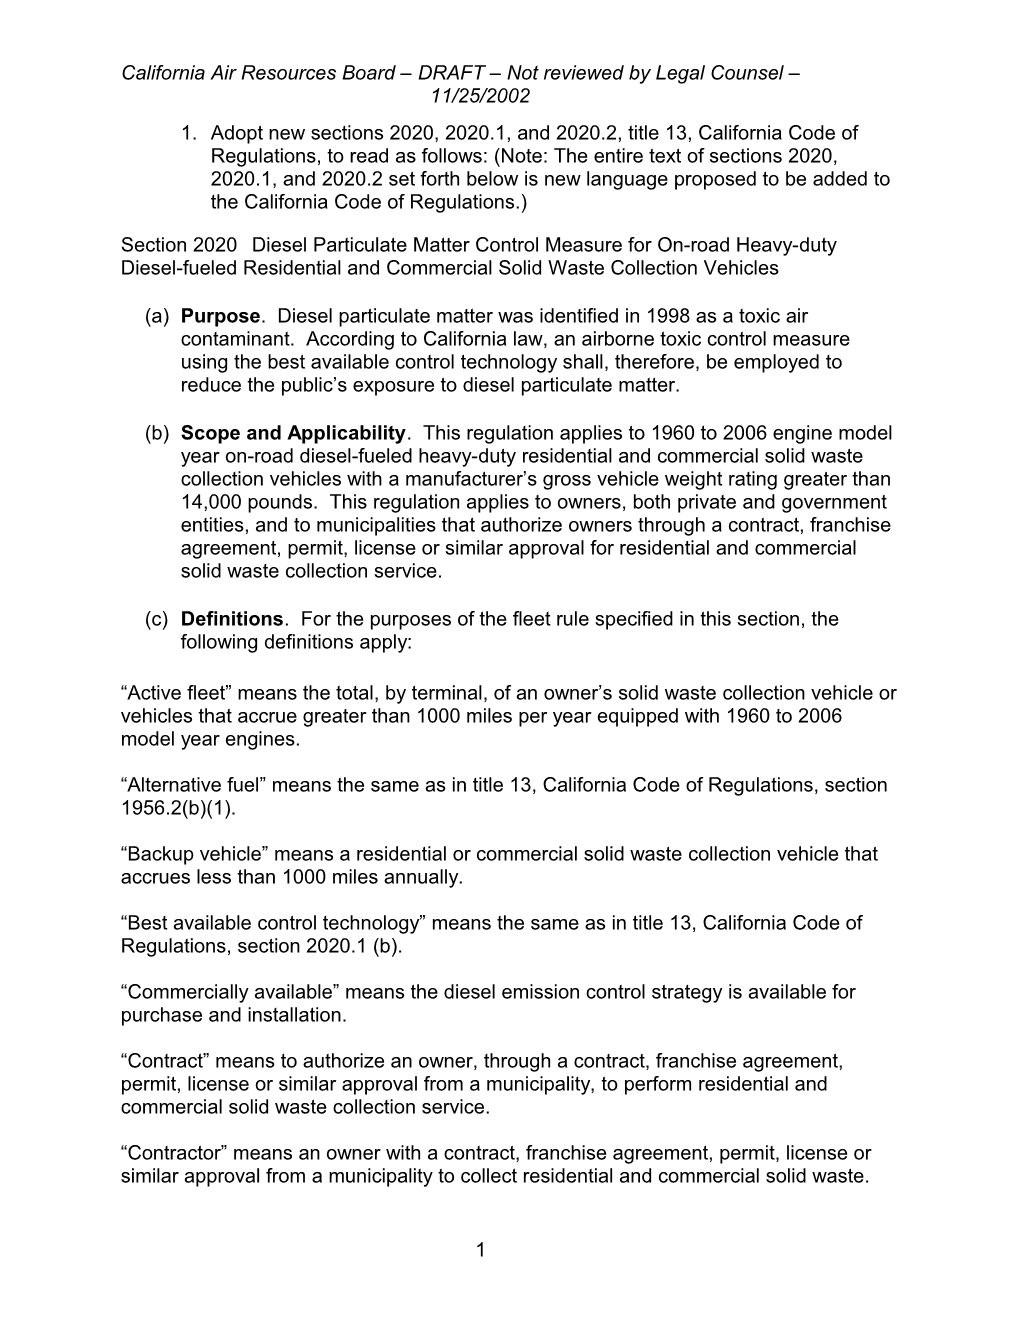 California Air Resources Board DRAFT Not Reviewed by Legal Counsel 11/25/2002